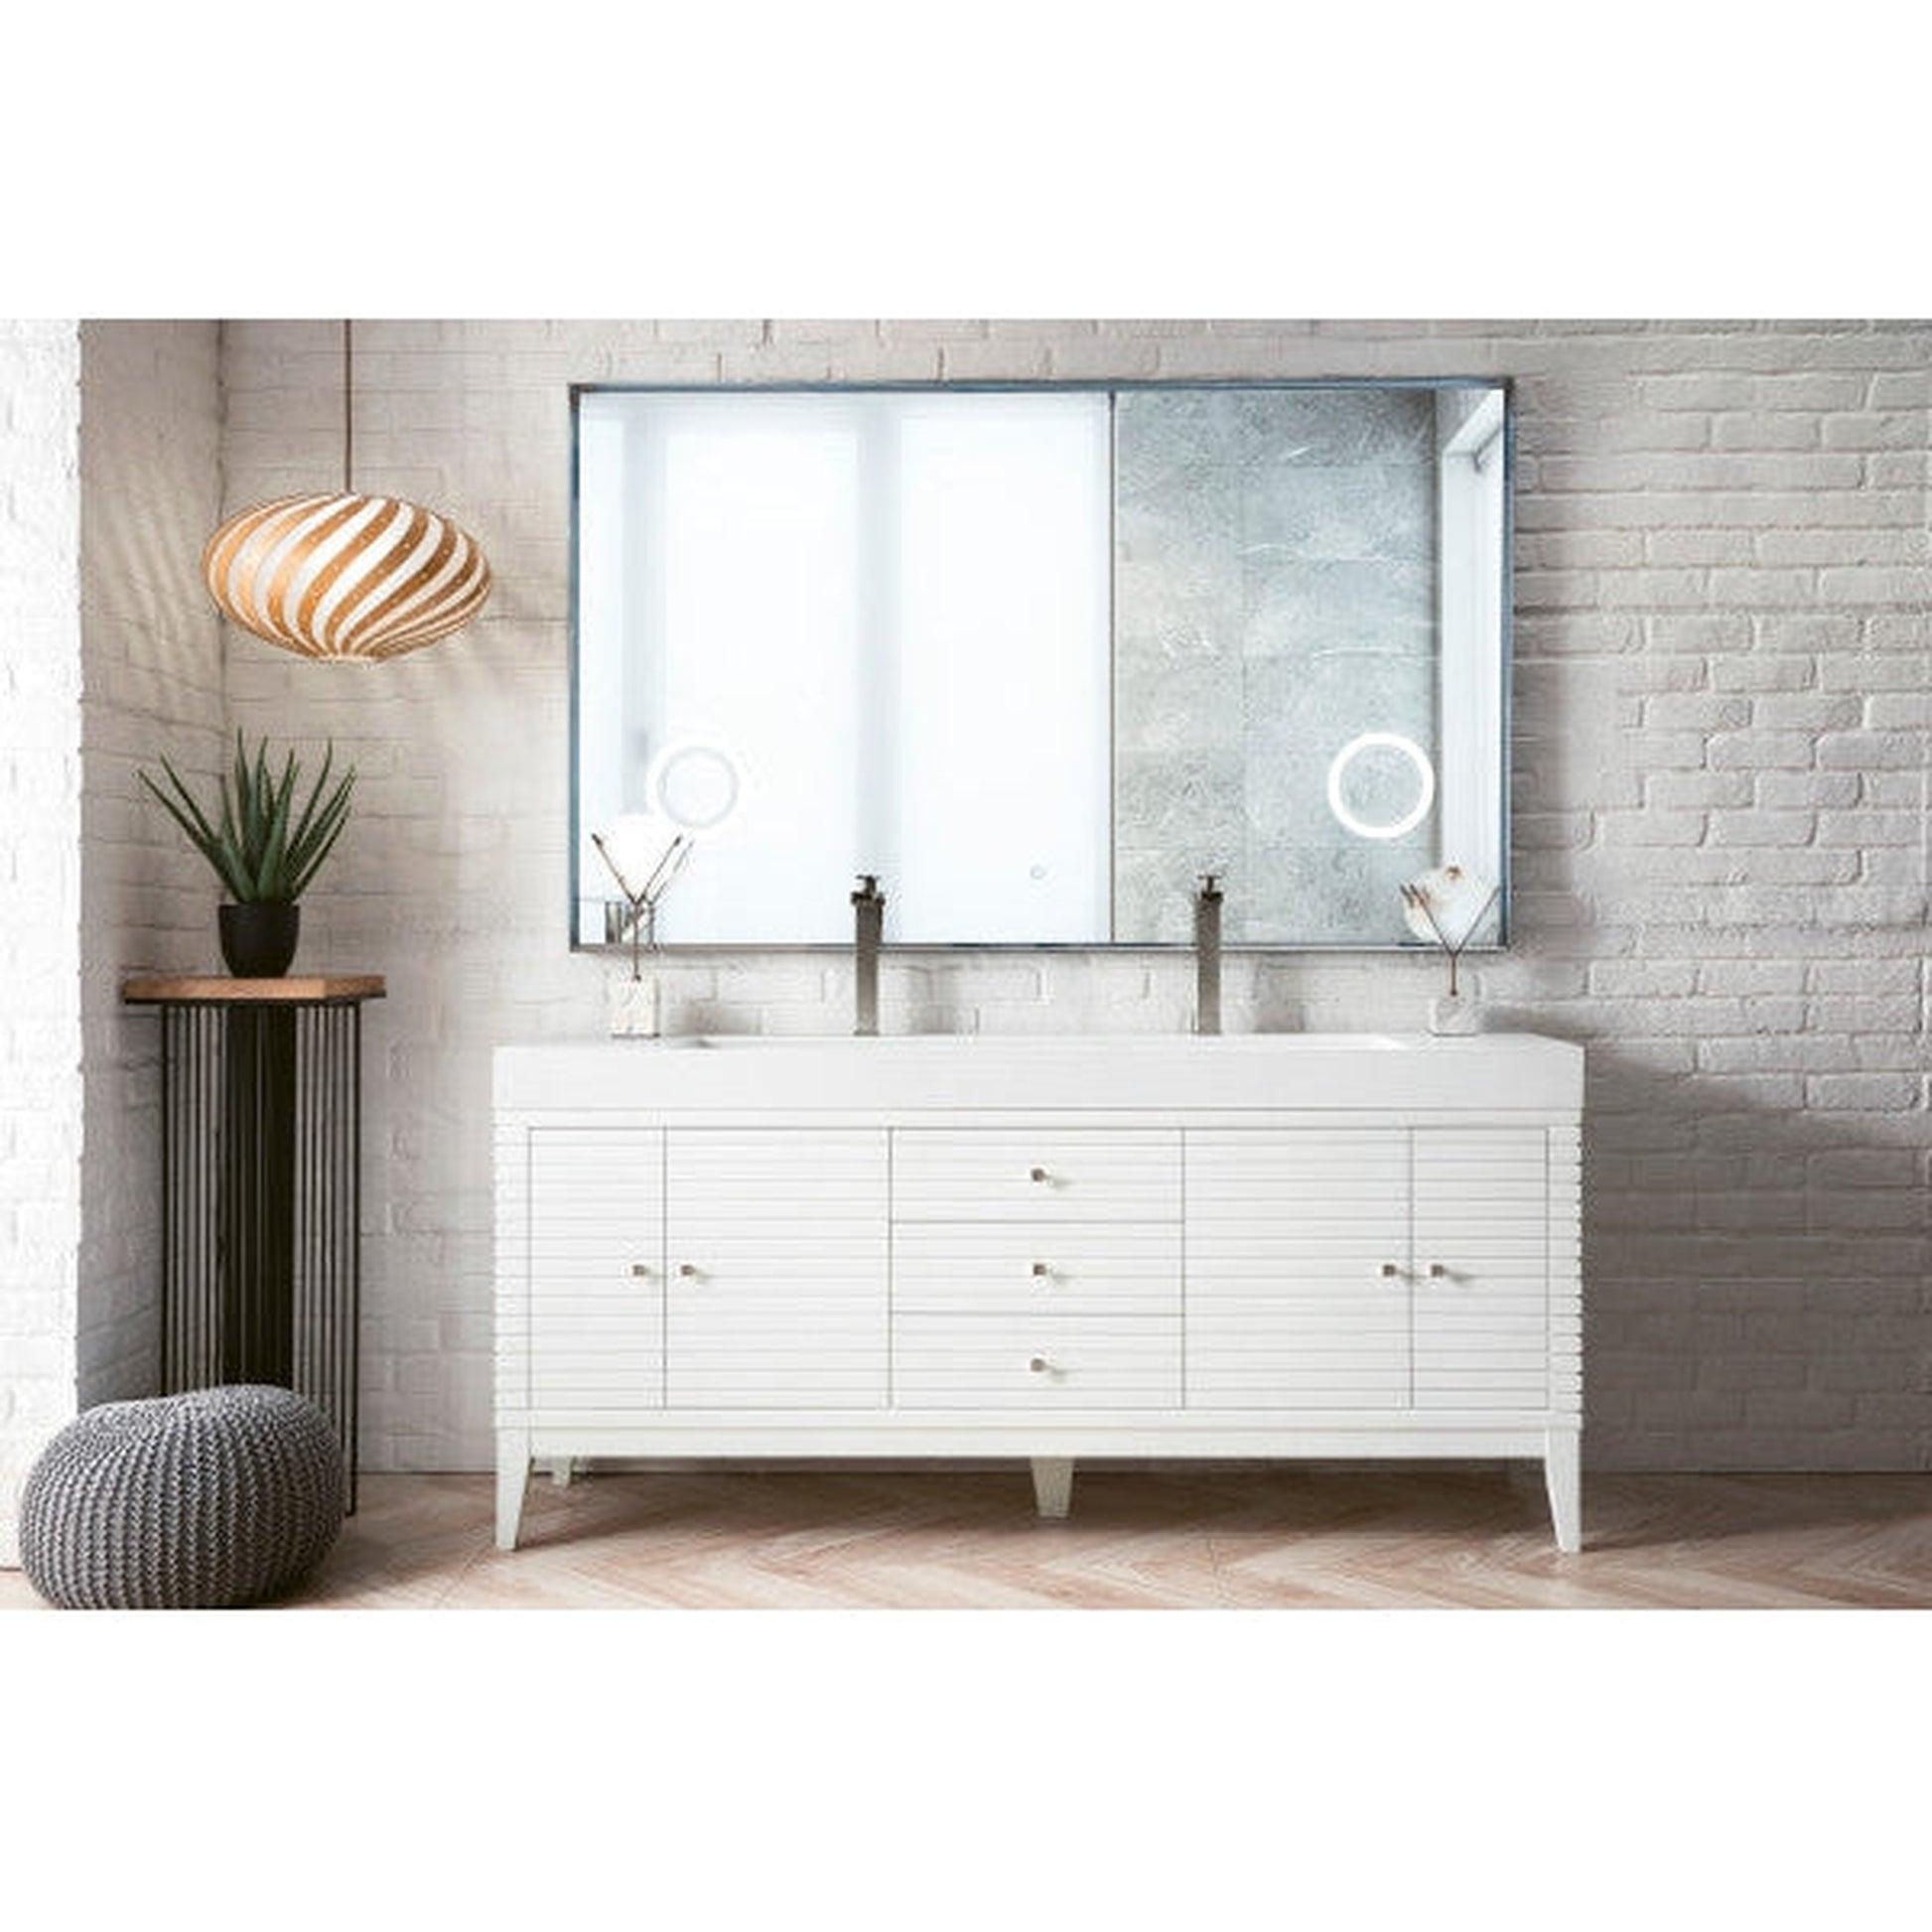 James Martin Linear 73" Double Glossy White Bathroom Vanity With 6" Glossy White Composite Countertop